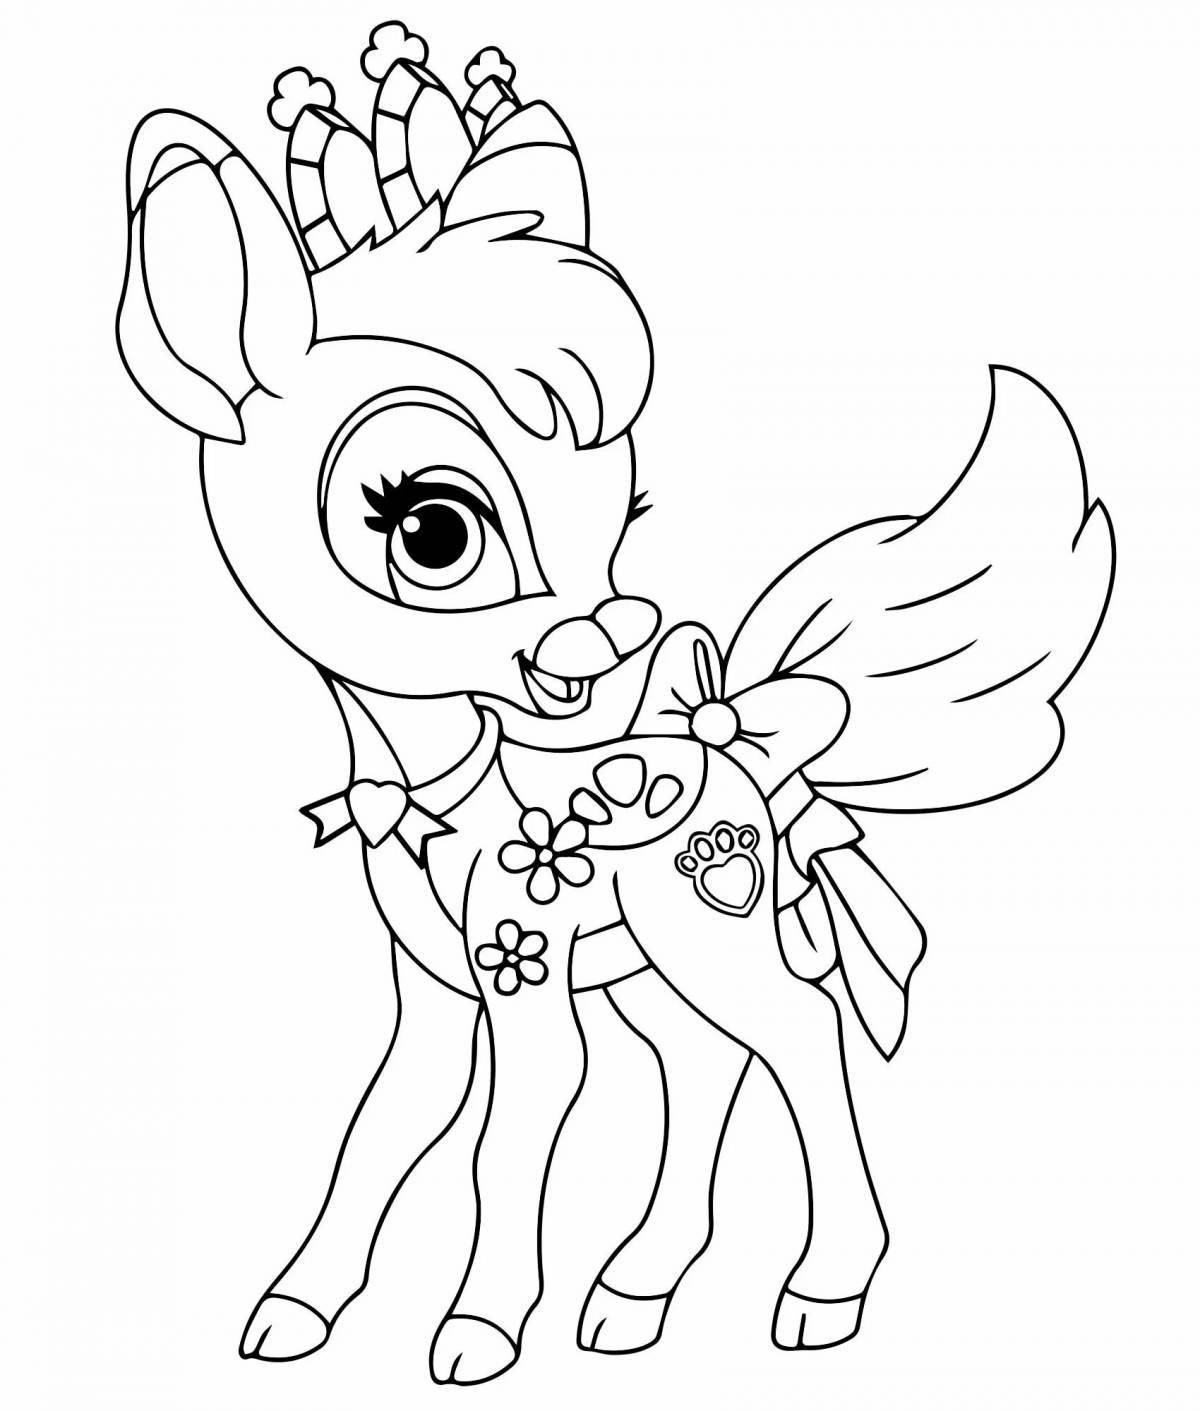 Coloring page dazzling super pets